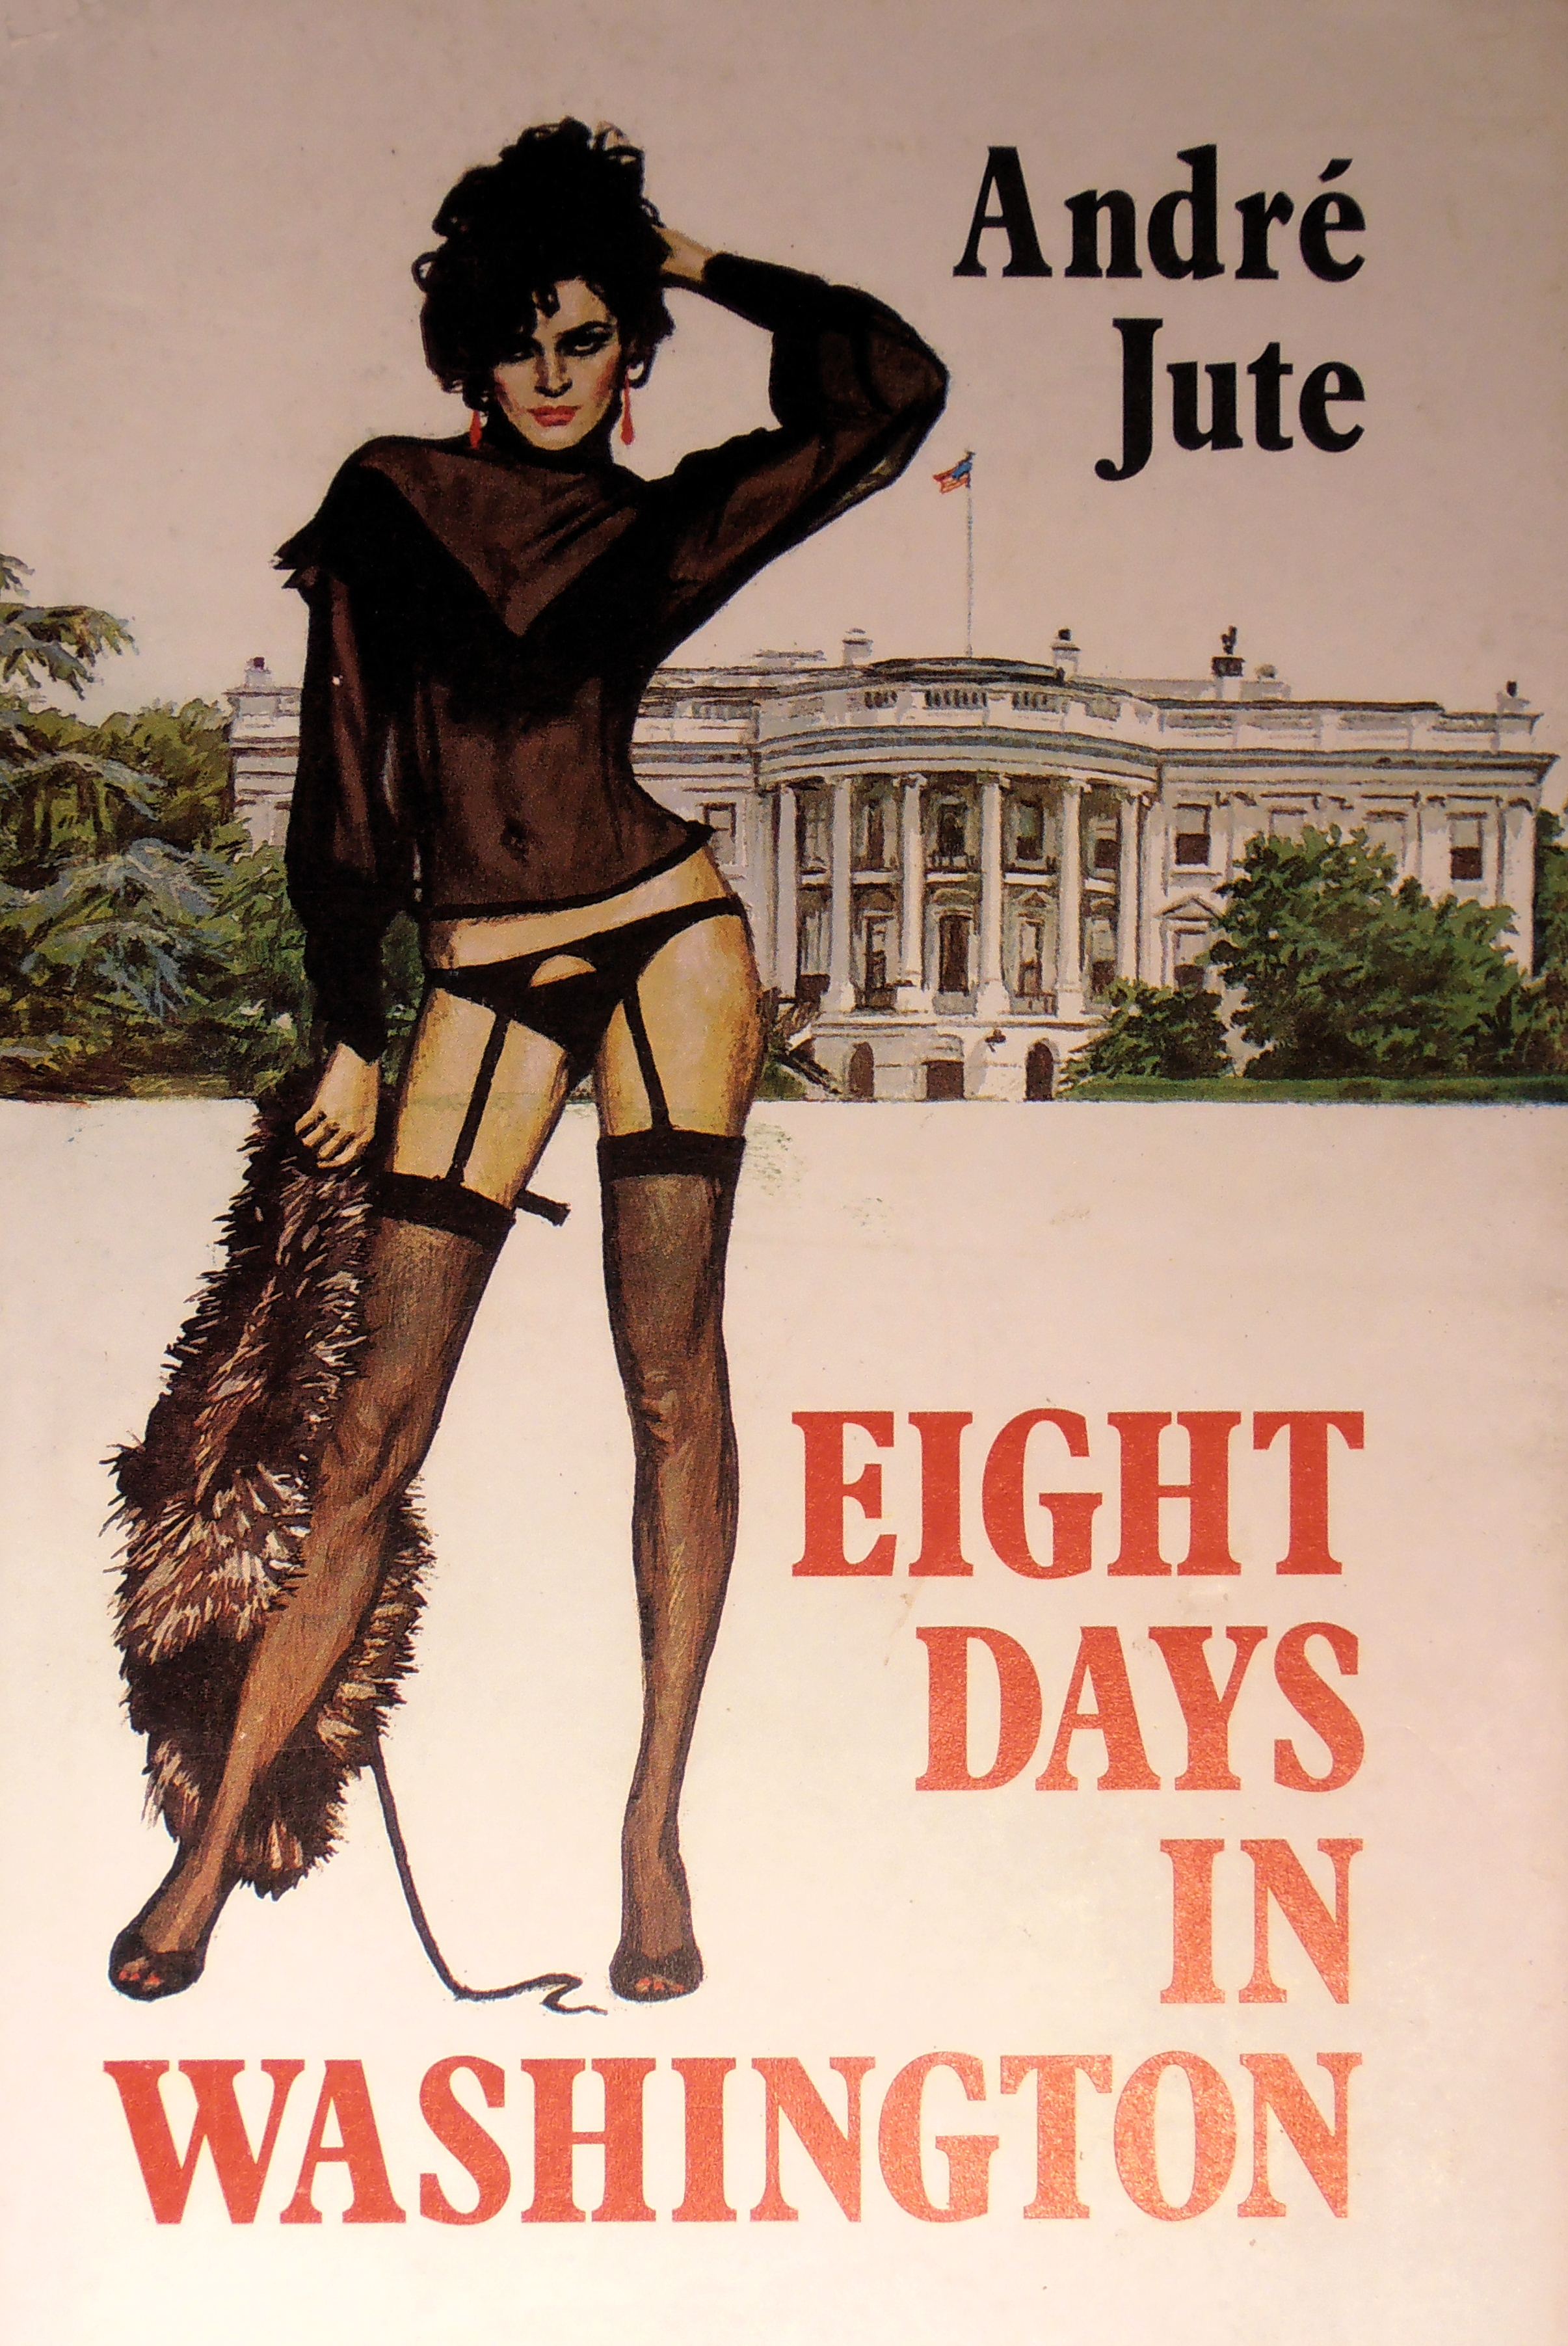 EIGHT DAYS IN WASHINGTON  by Andre Jute